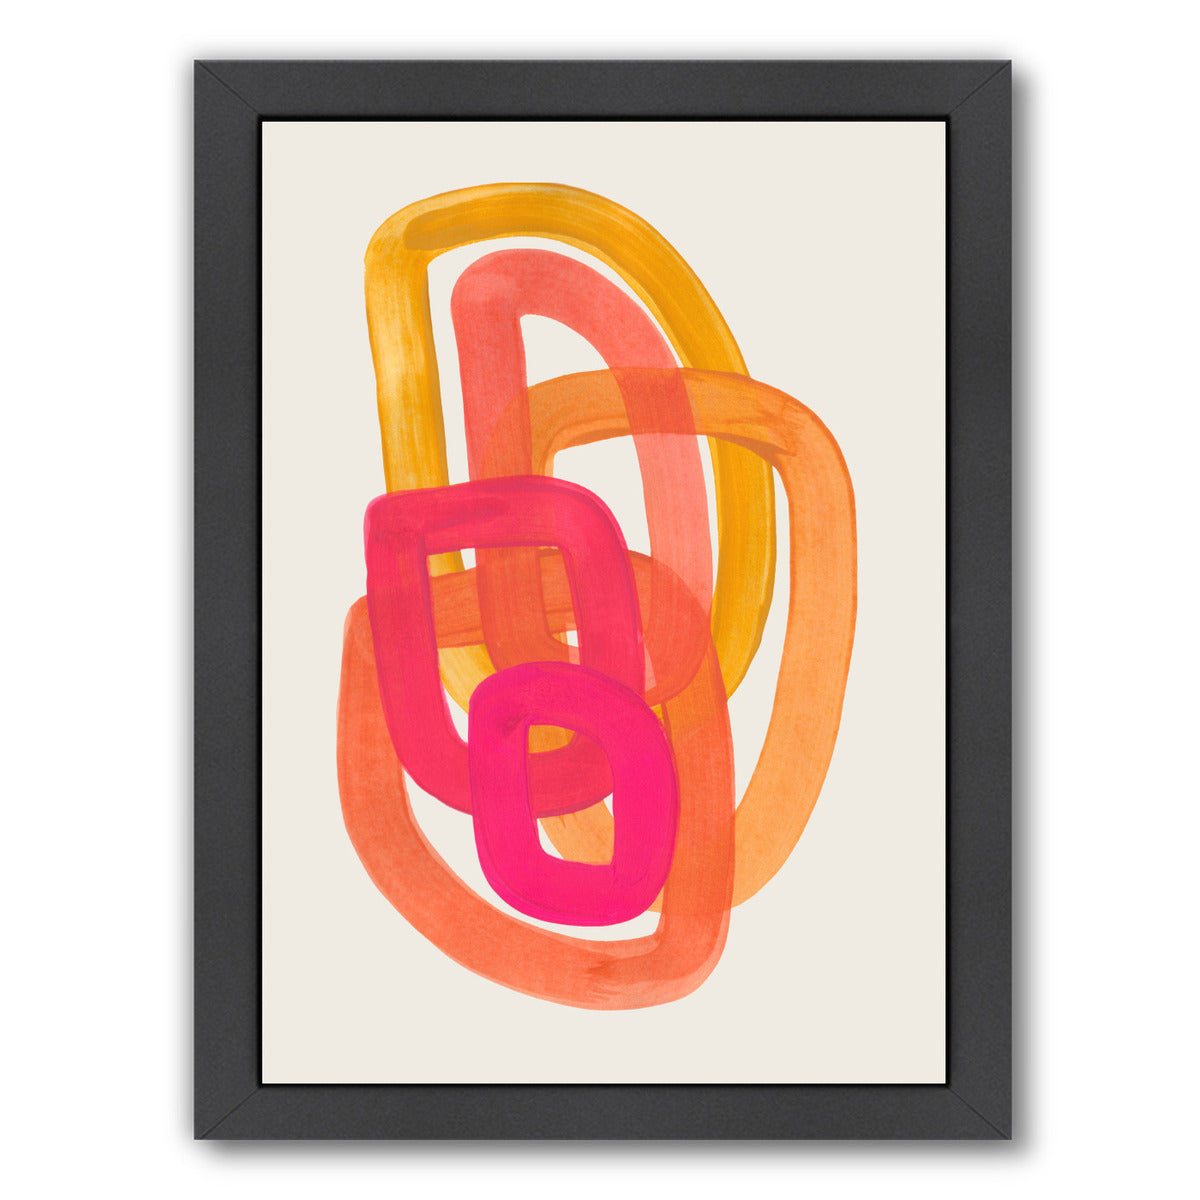 Funky Yellow Magenta Spiral By Ejaaz Haniff - Black Framed Print - Wall Art - Americanflat